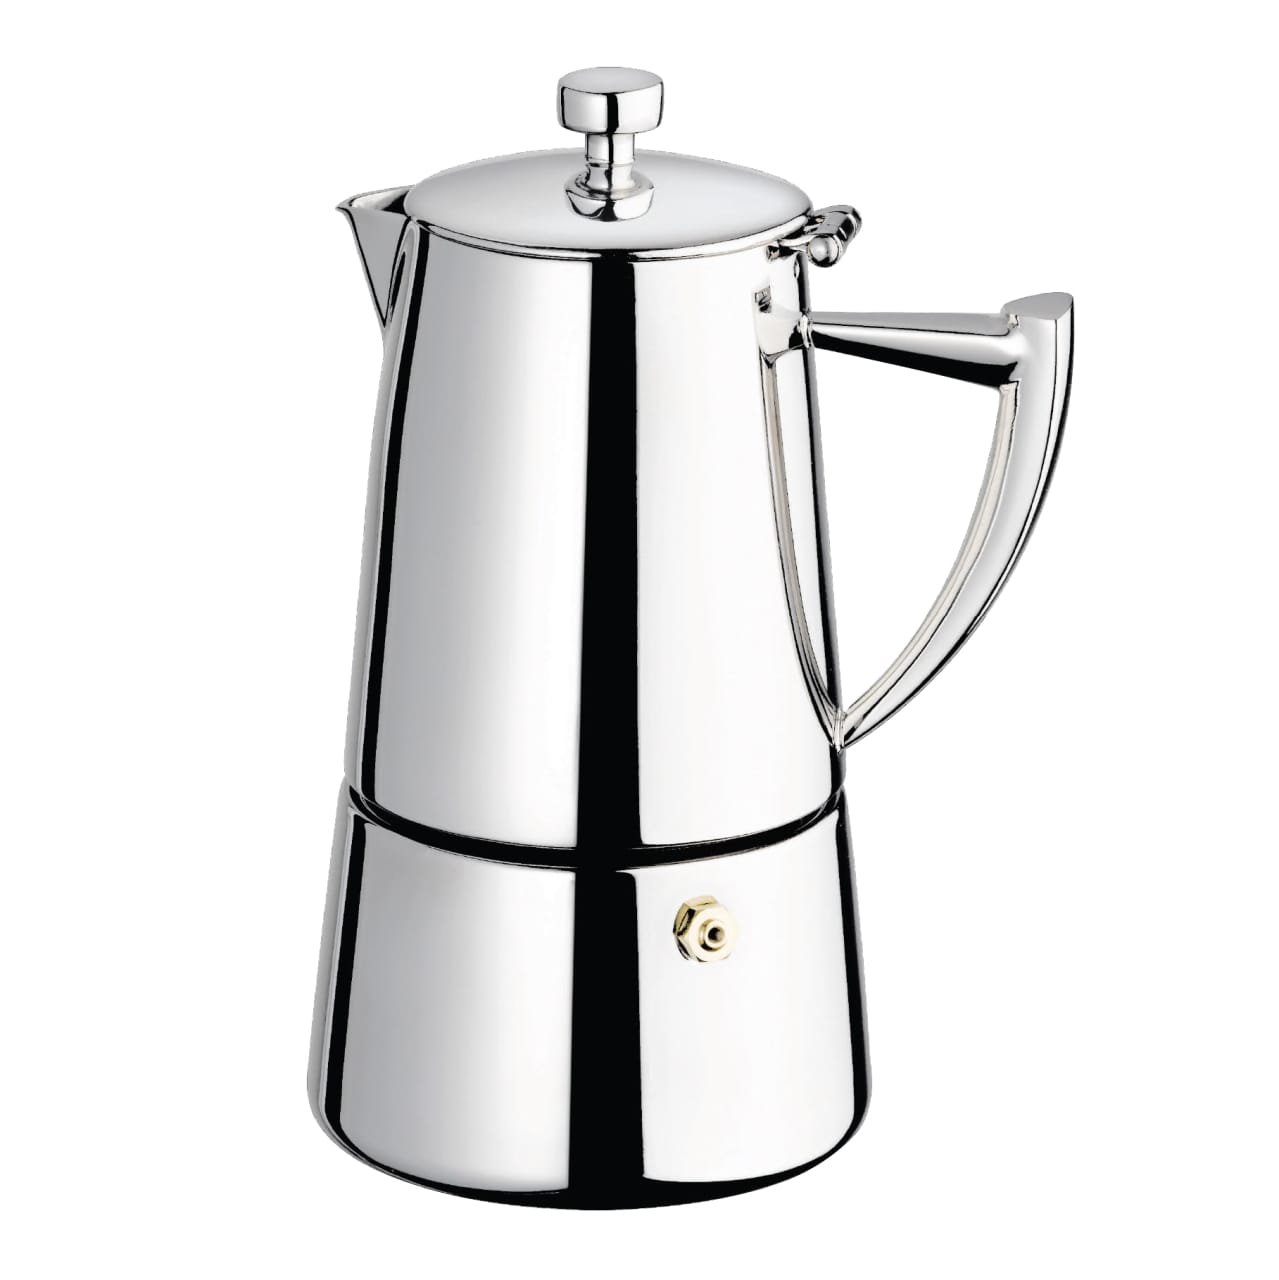 10-Cup Stainless Steel Stovetop Moka Espresso Maker